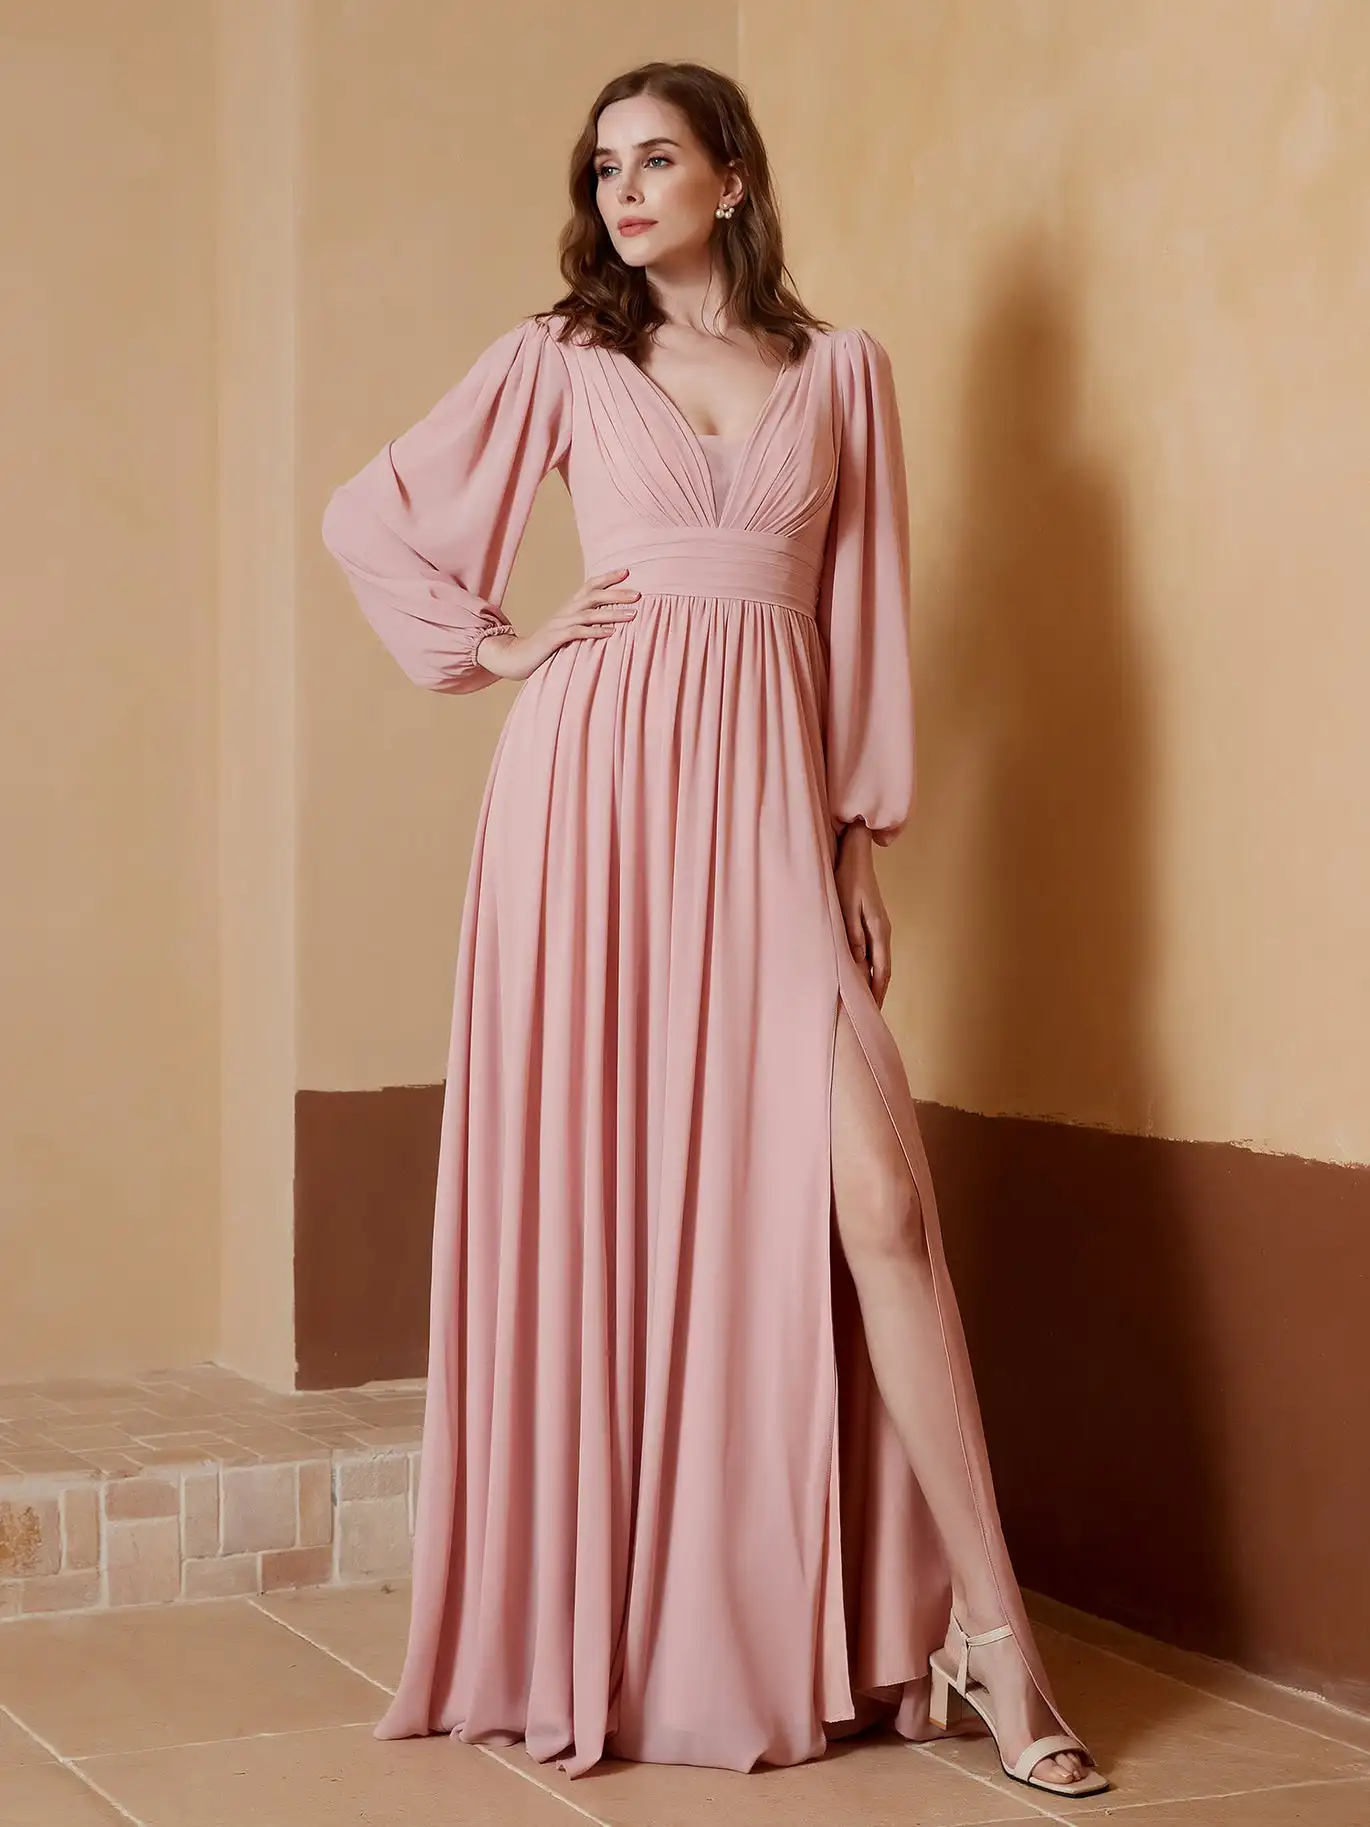 

Plunging V-Neck Chiffon Bridesmaid Dress With Slit Backless A-Line Wedding Cocktail Dresses Pleated Backless Evening Gowns